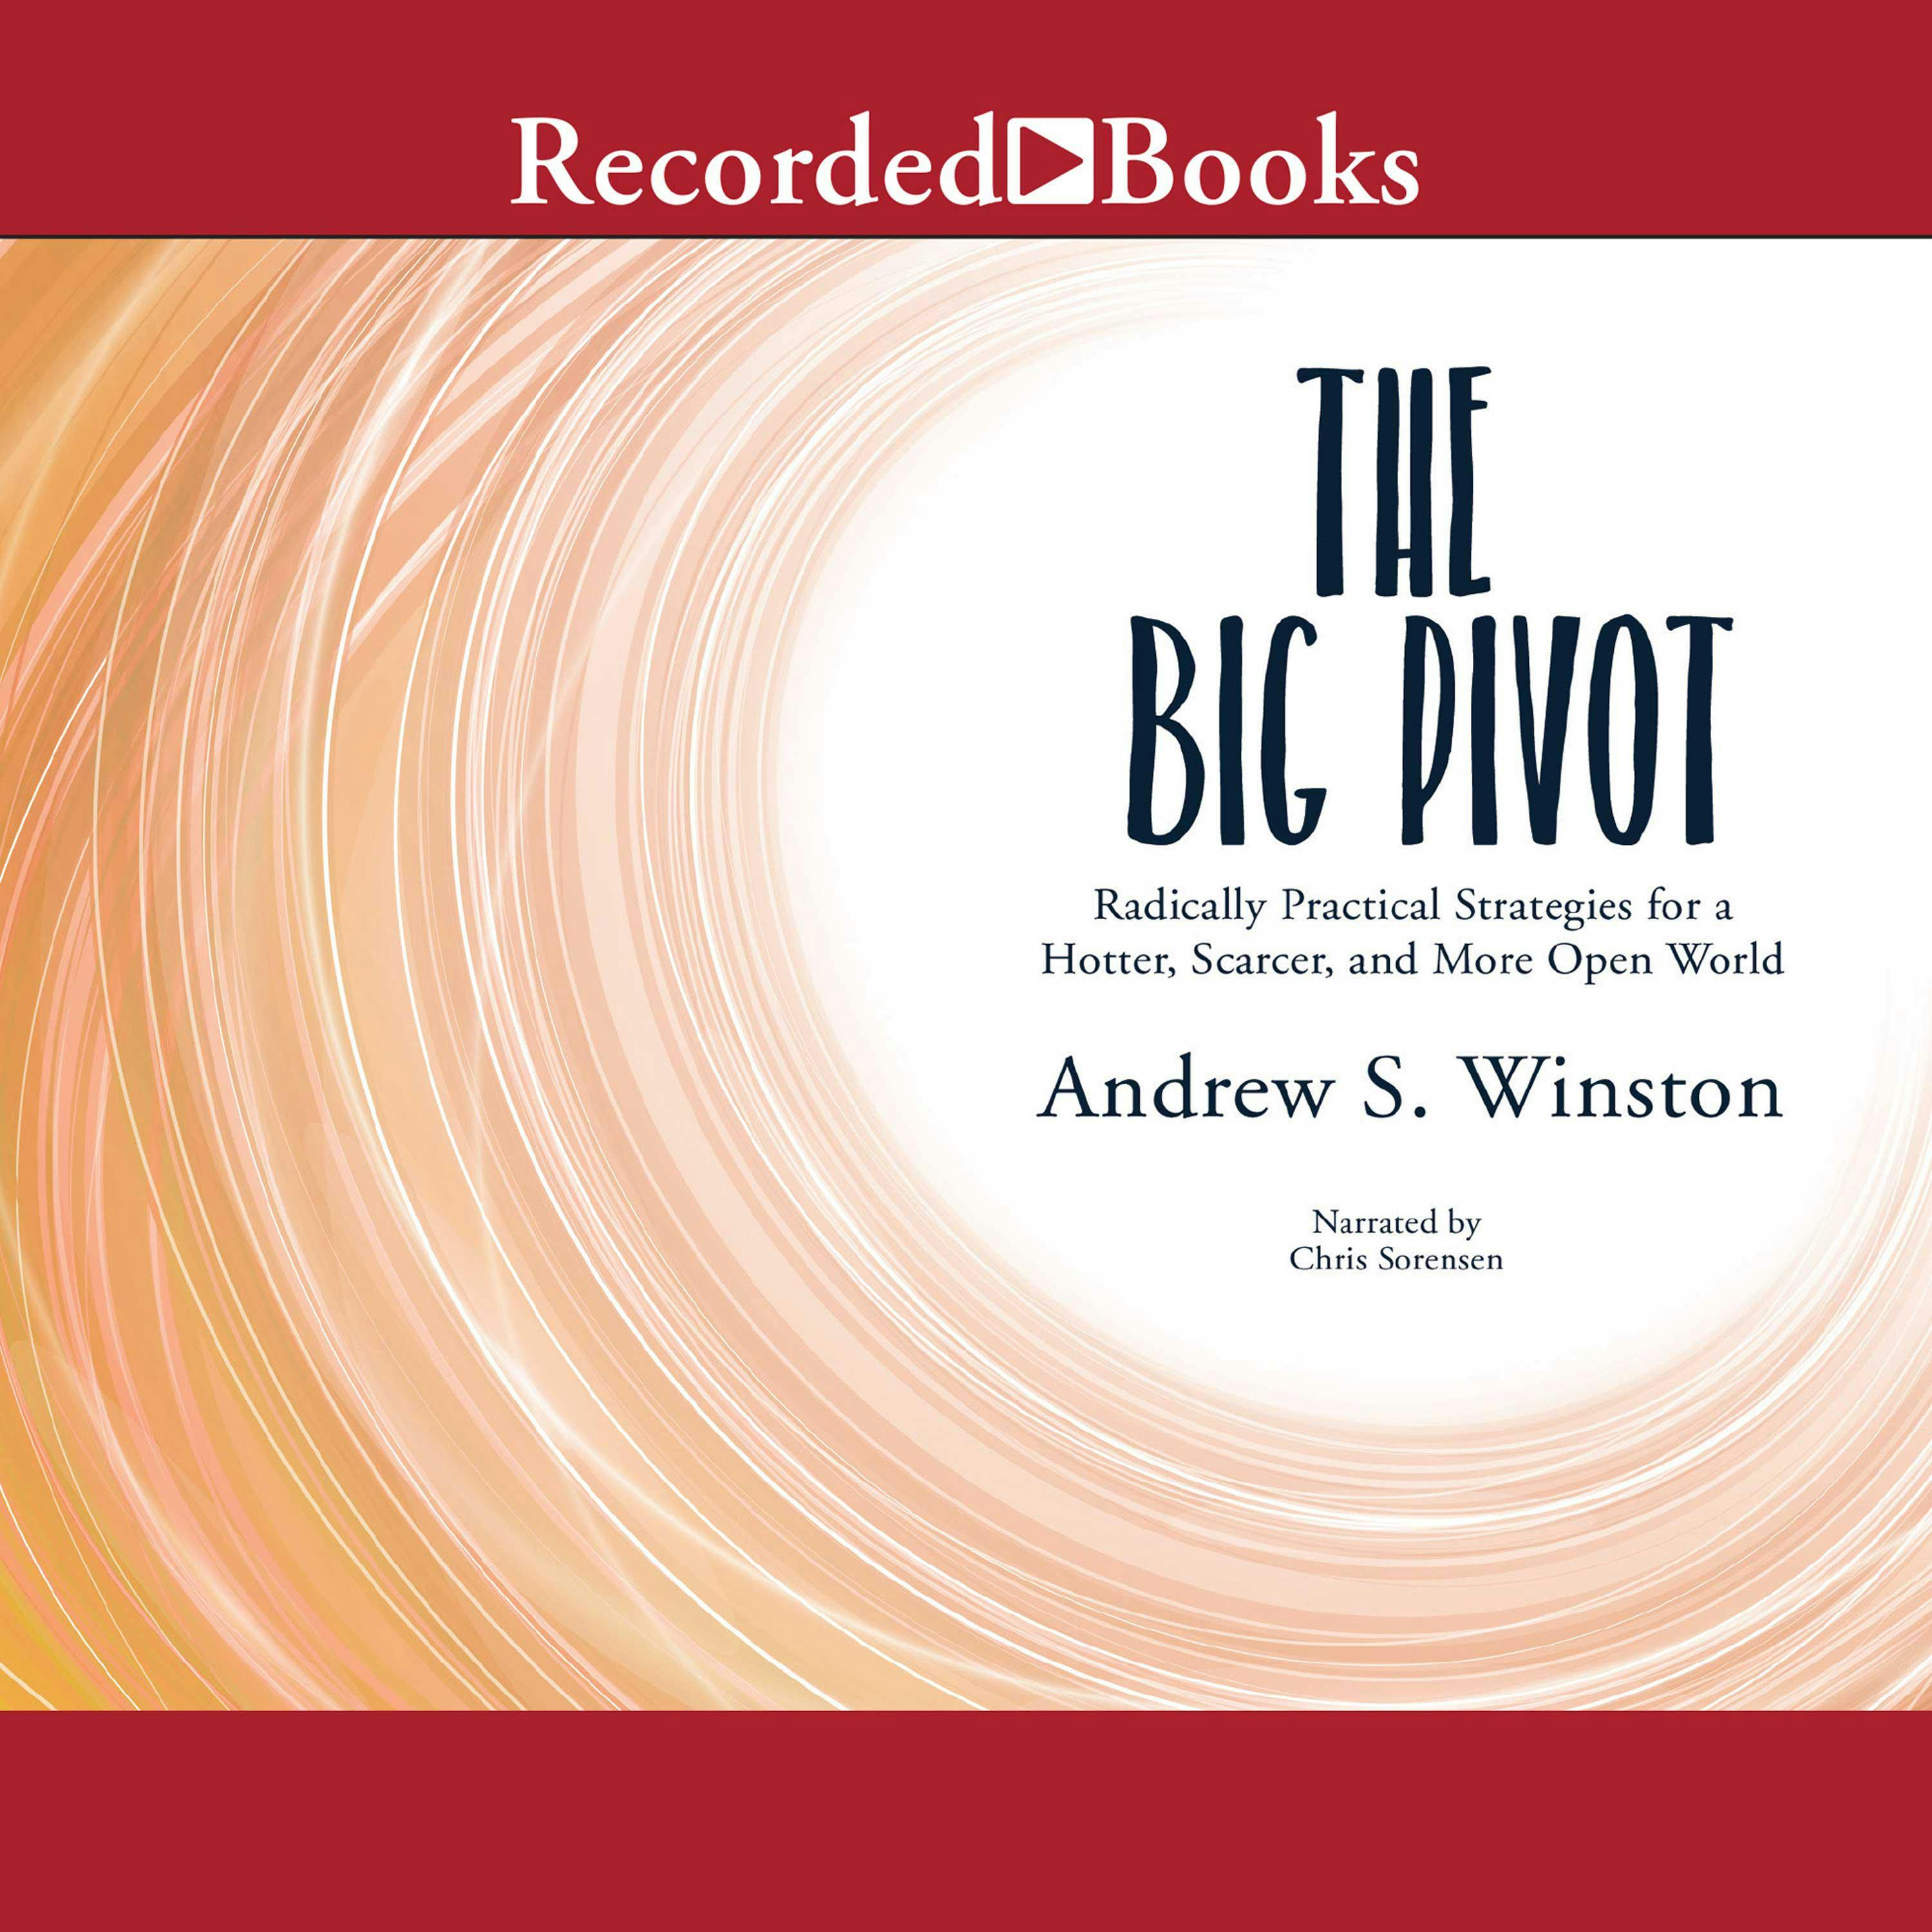 The Big Pivot: Radically Practical Strategies for a Hotter, Scarcer, and More Open World - Andrew S. Winston